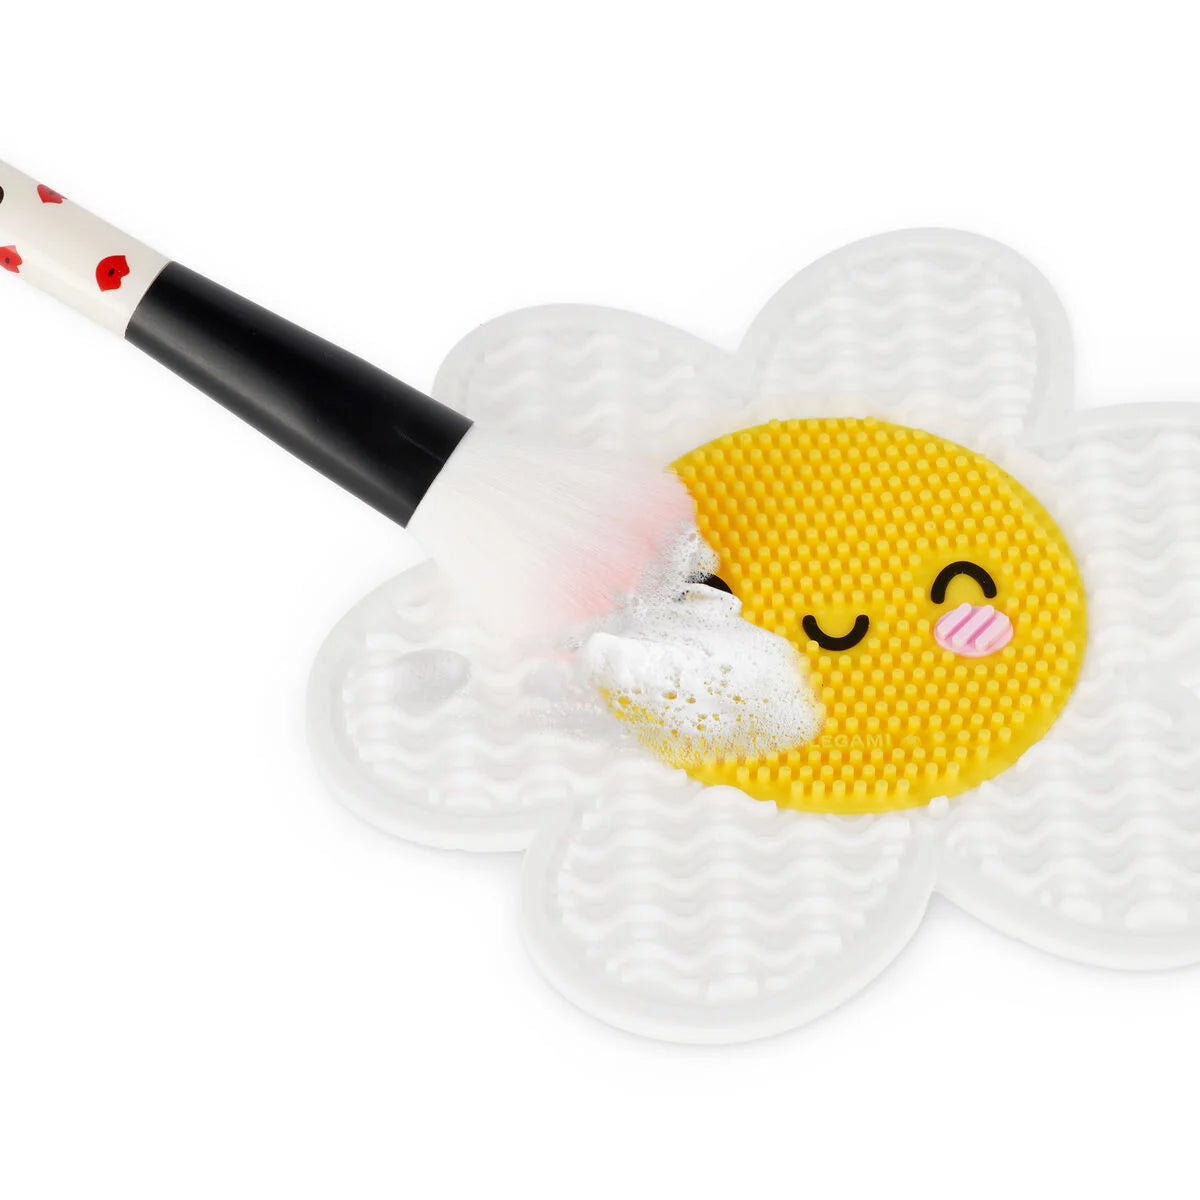 Fabulous Gifts Beauty Legami Make Up Brush Cleaning Pad Daisy by Weirs of Baggot Street